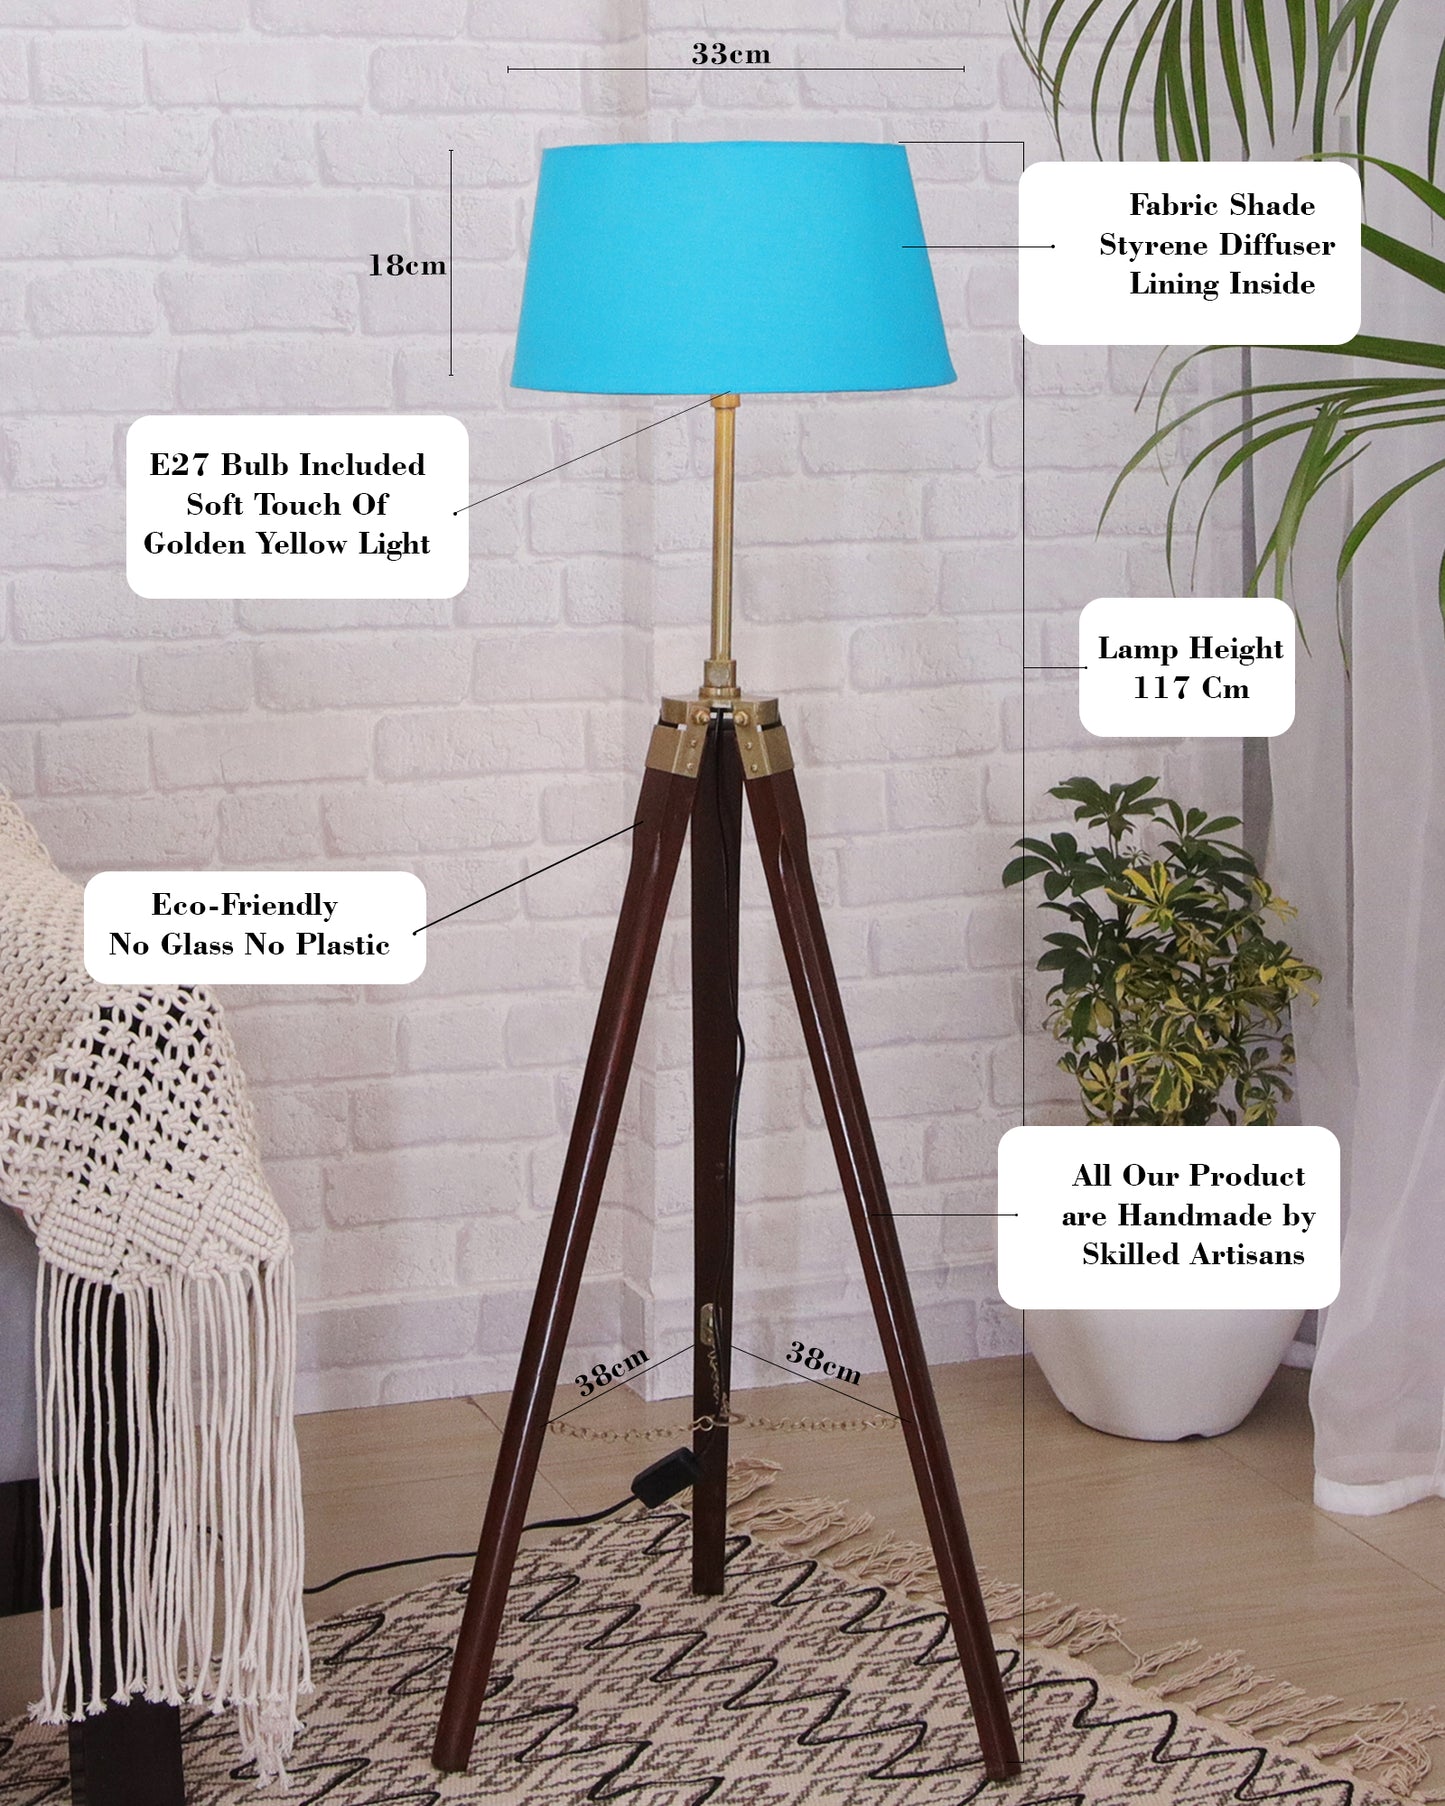 Tripod Floor Lamp with Shade Wooden, Brass Finish Industrial Nautical Marine Decorative Lamp